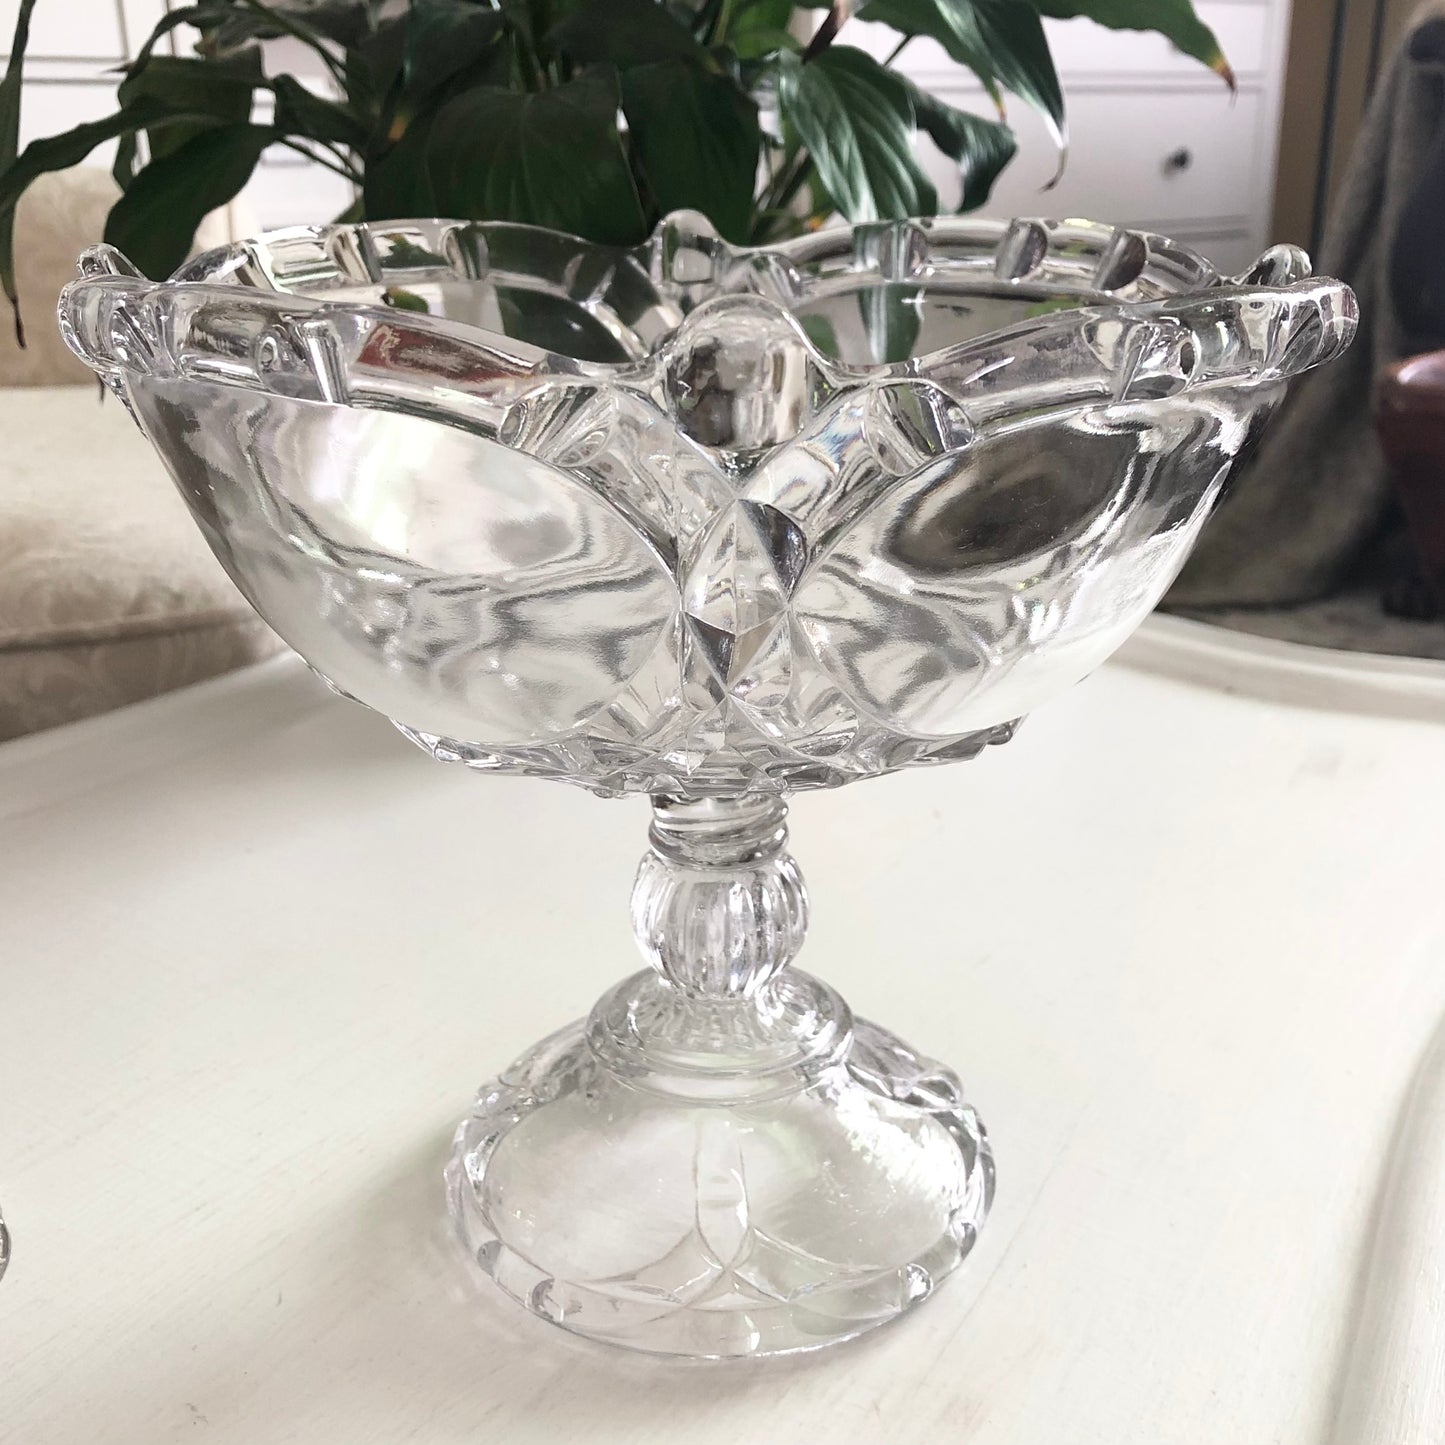 Early Pressed Glass Compote